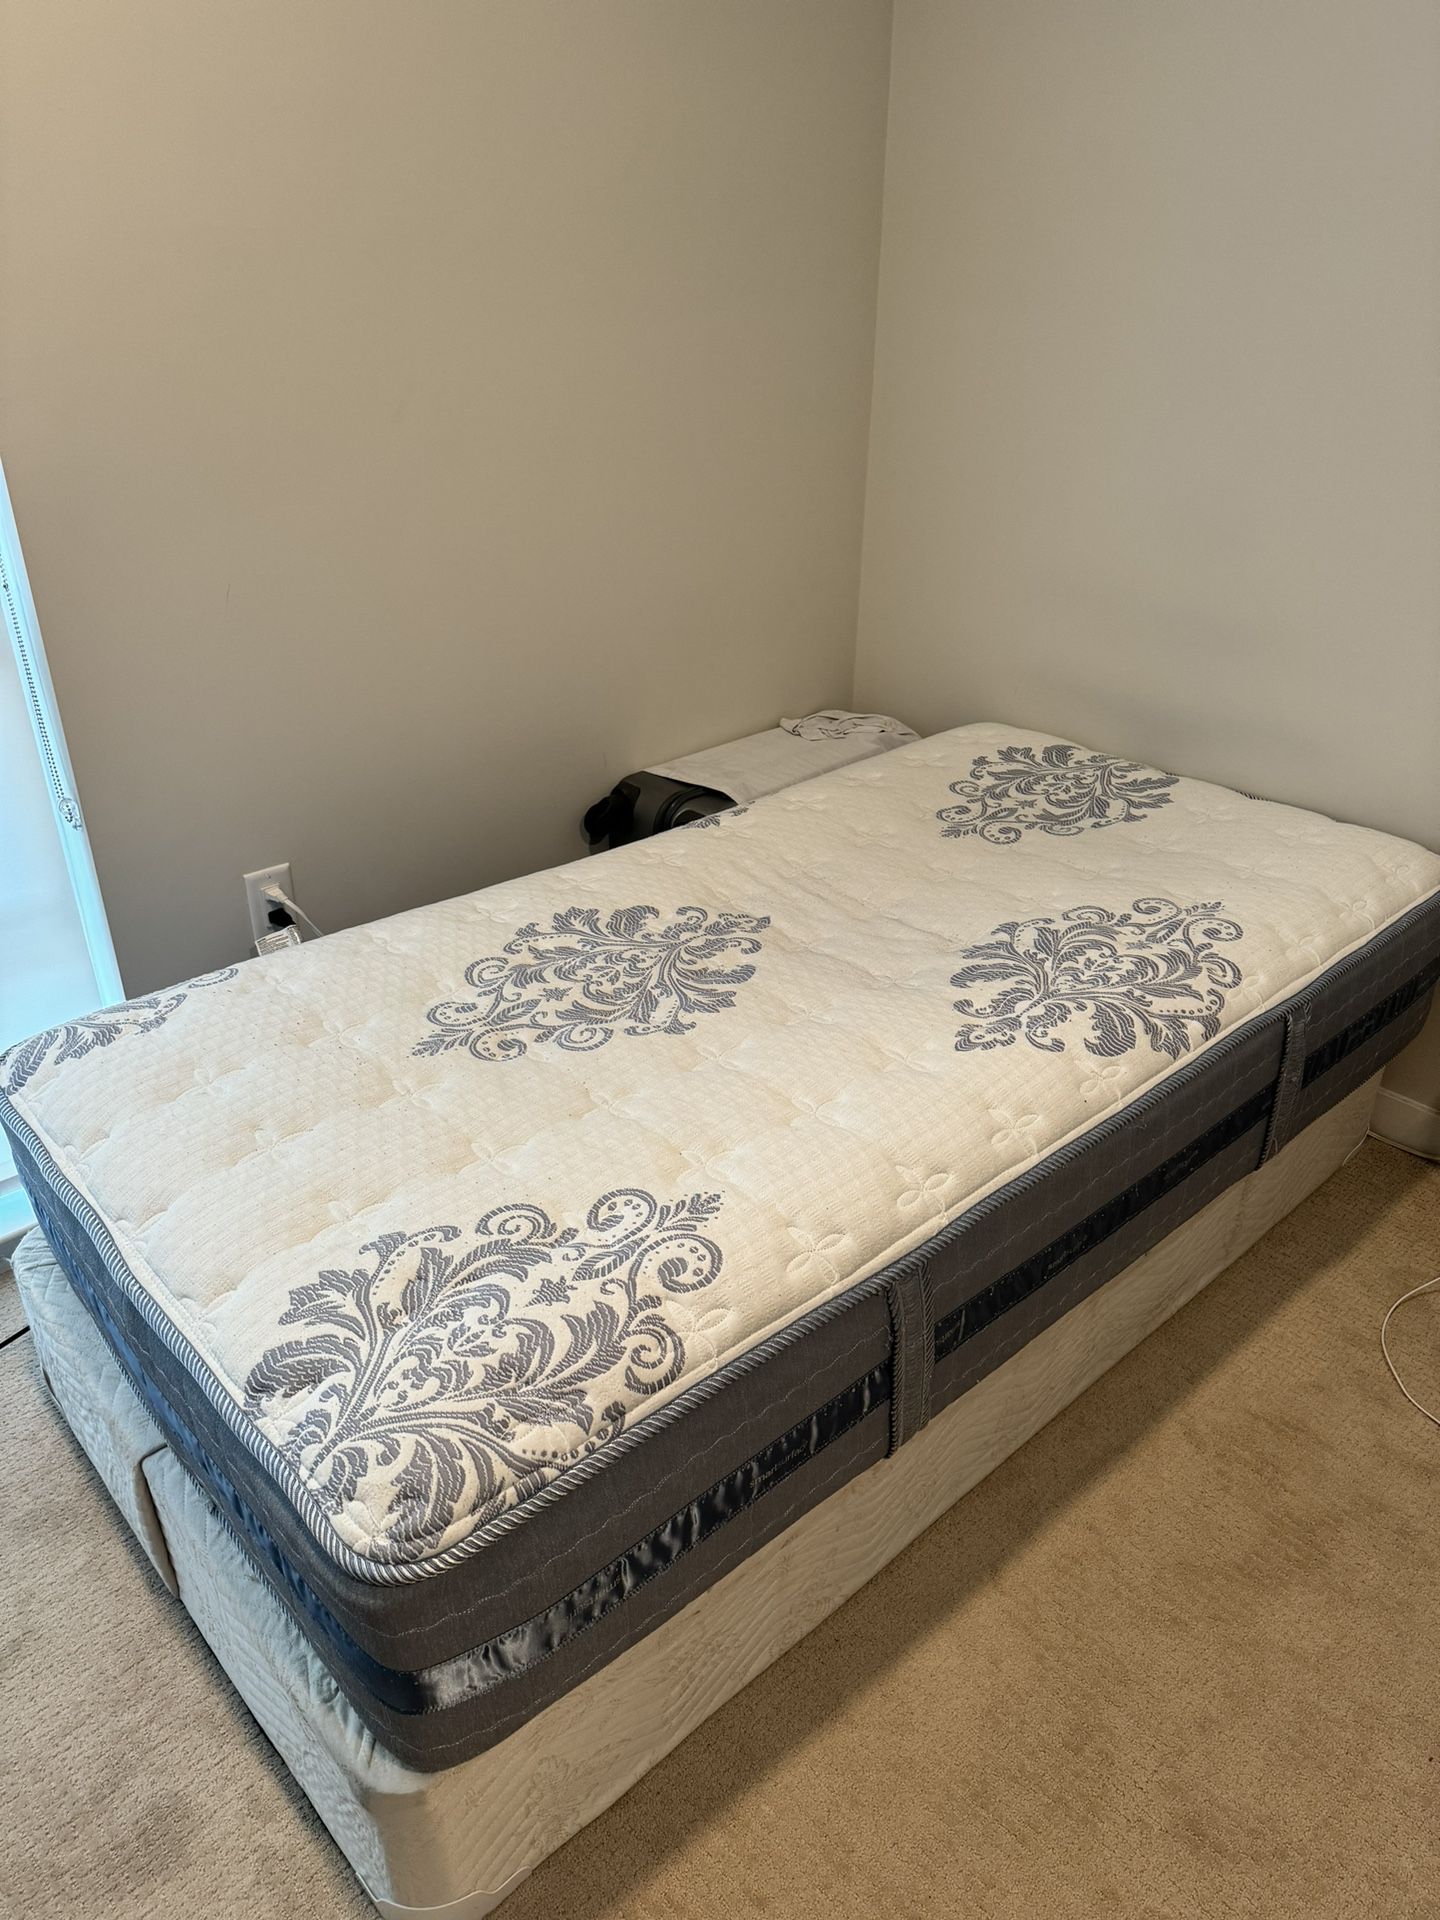 Twin bed / Mattress Serta smart surface and box spring / excellent condition.